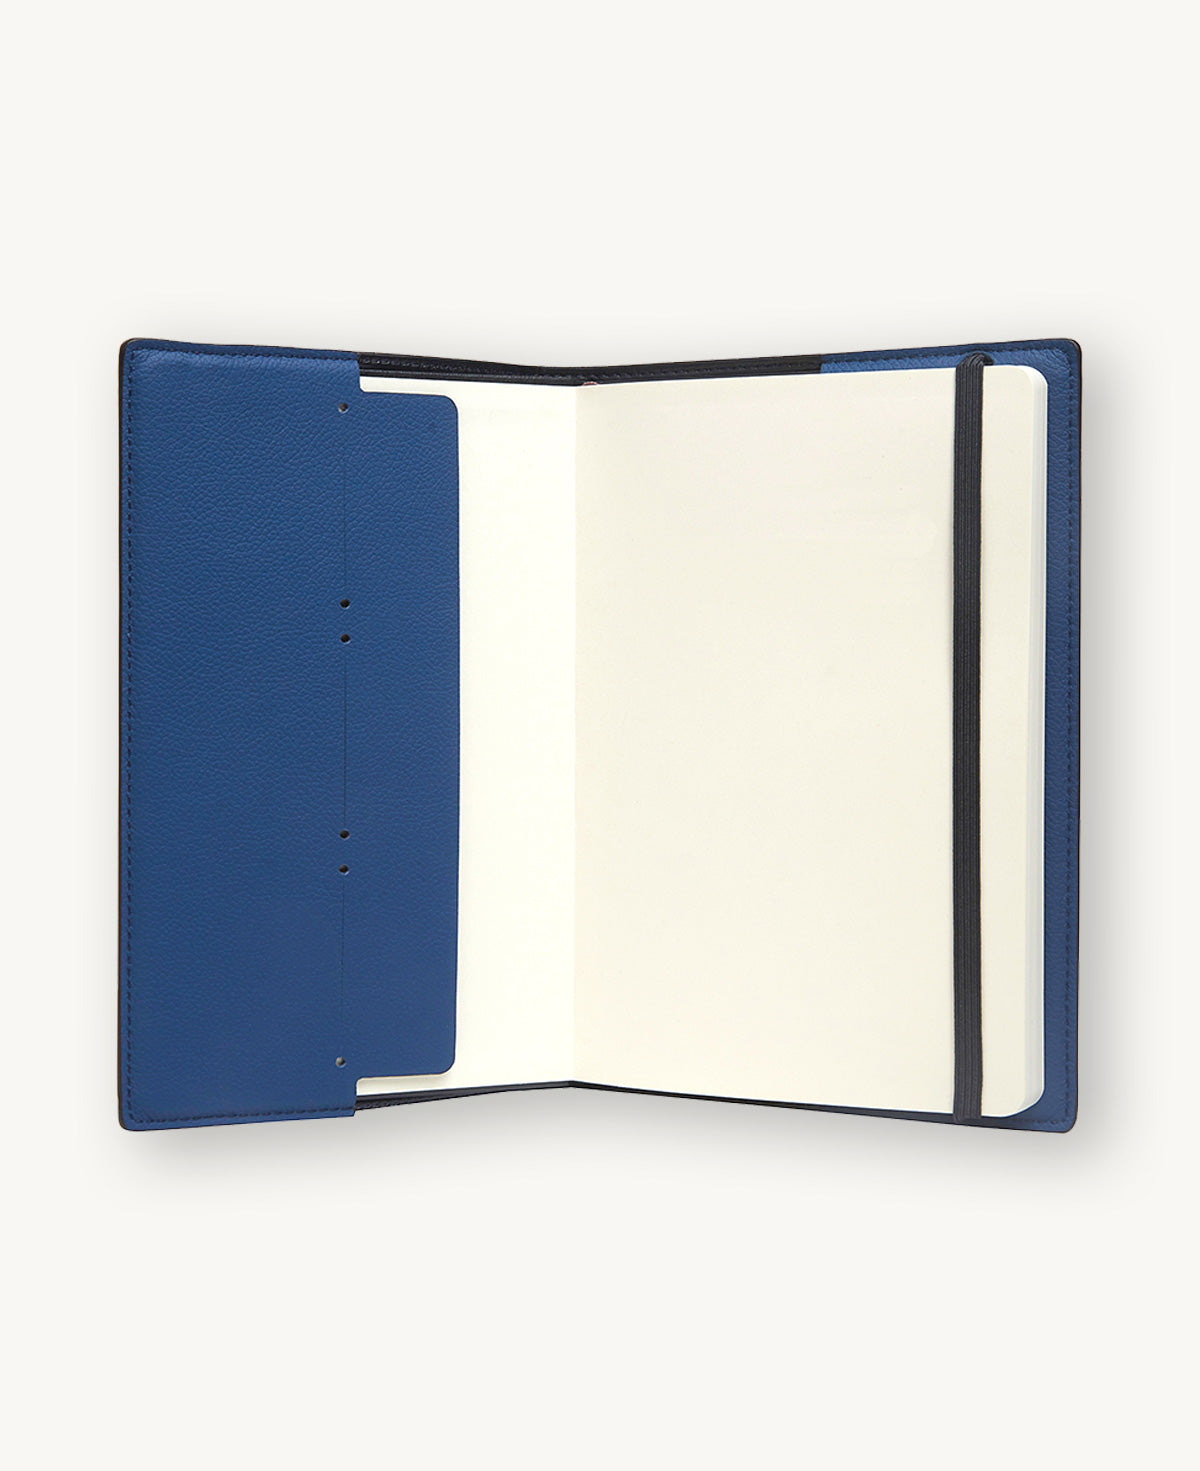 NOTEBOOK LARGE BLUE